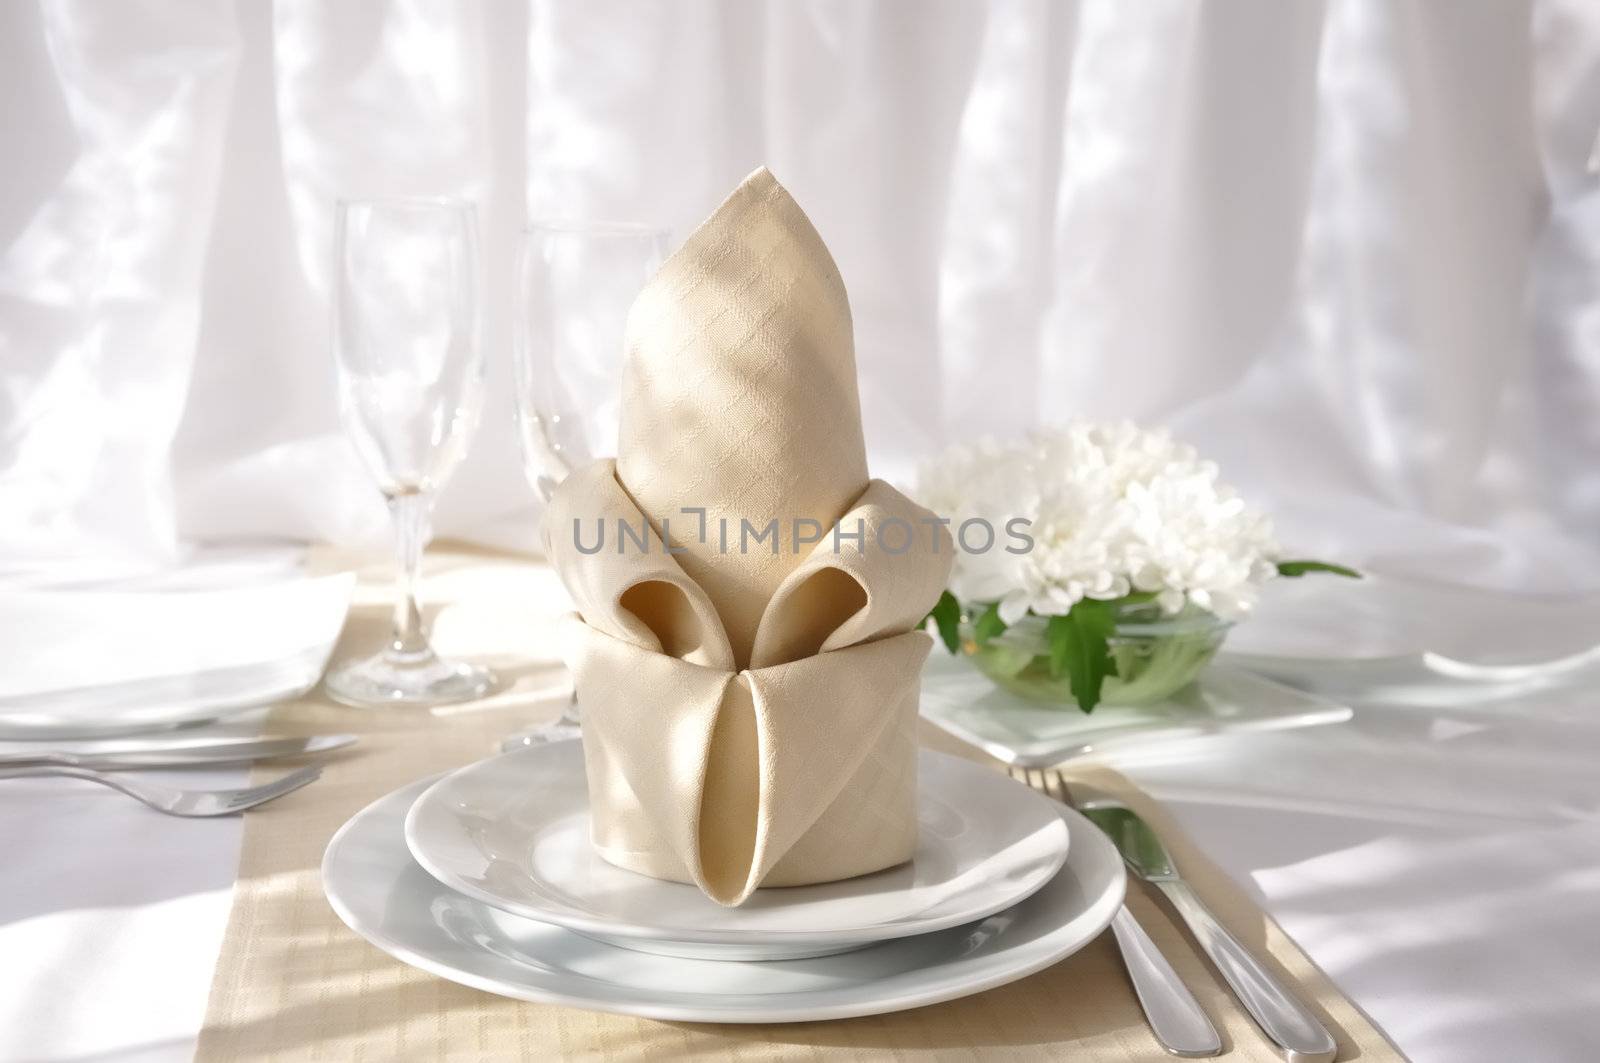 Napkin "hat with lapel" by Apolonia